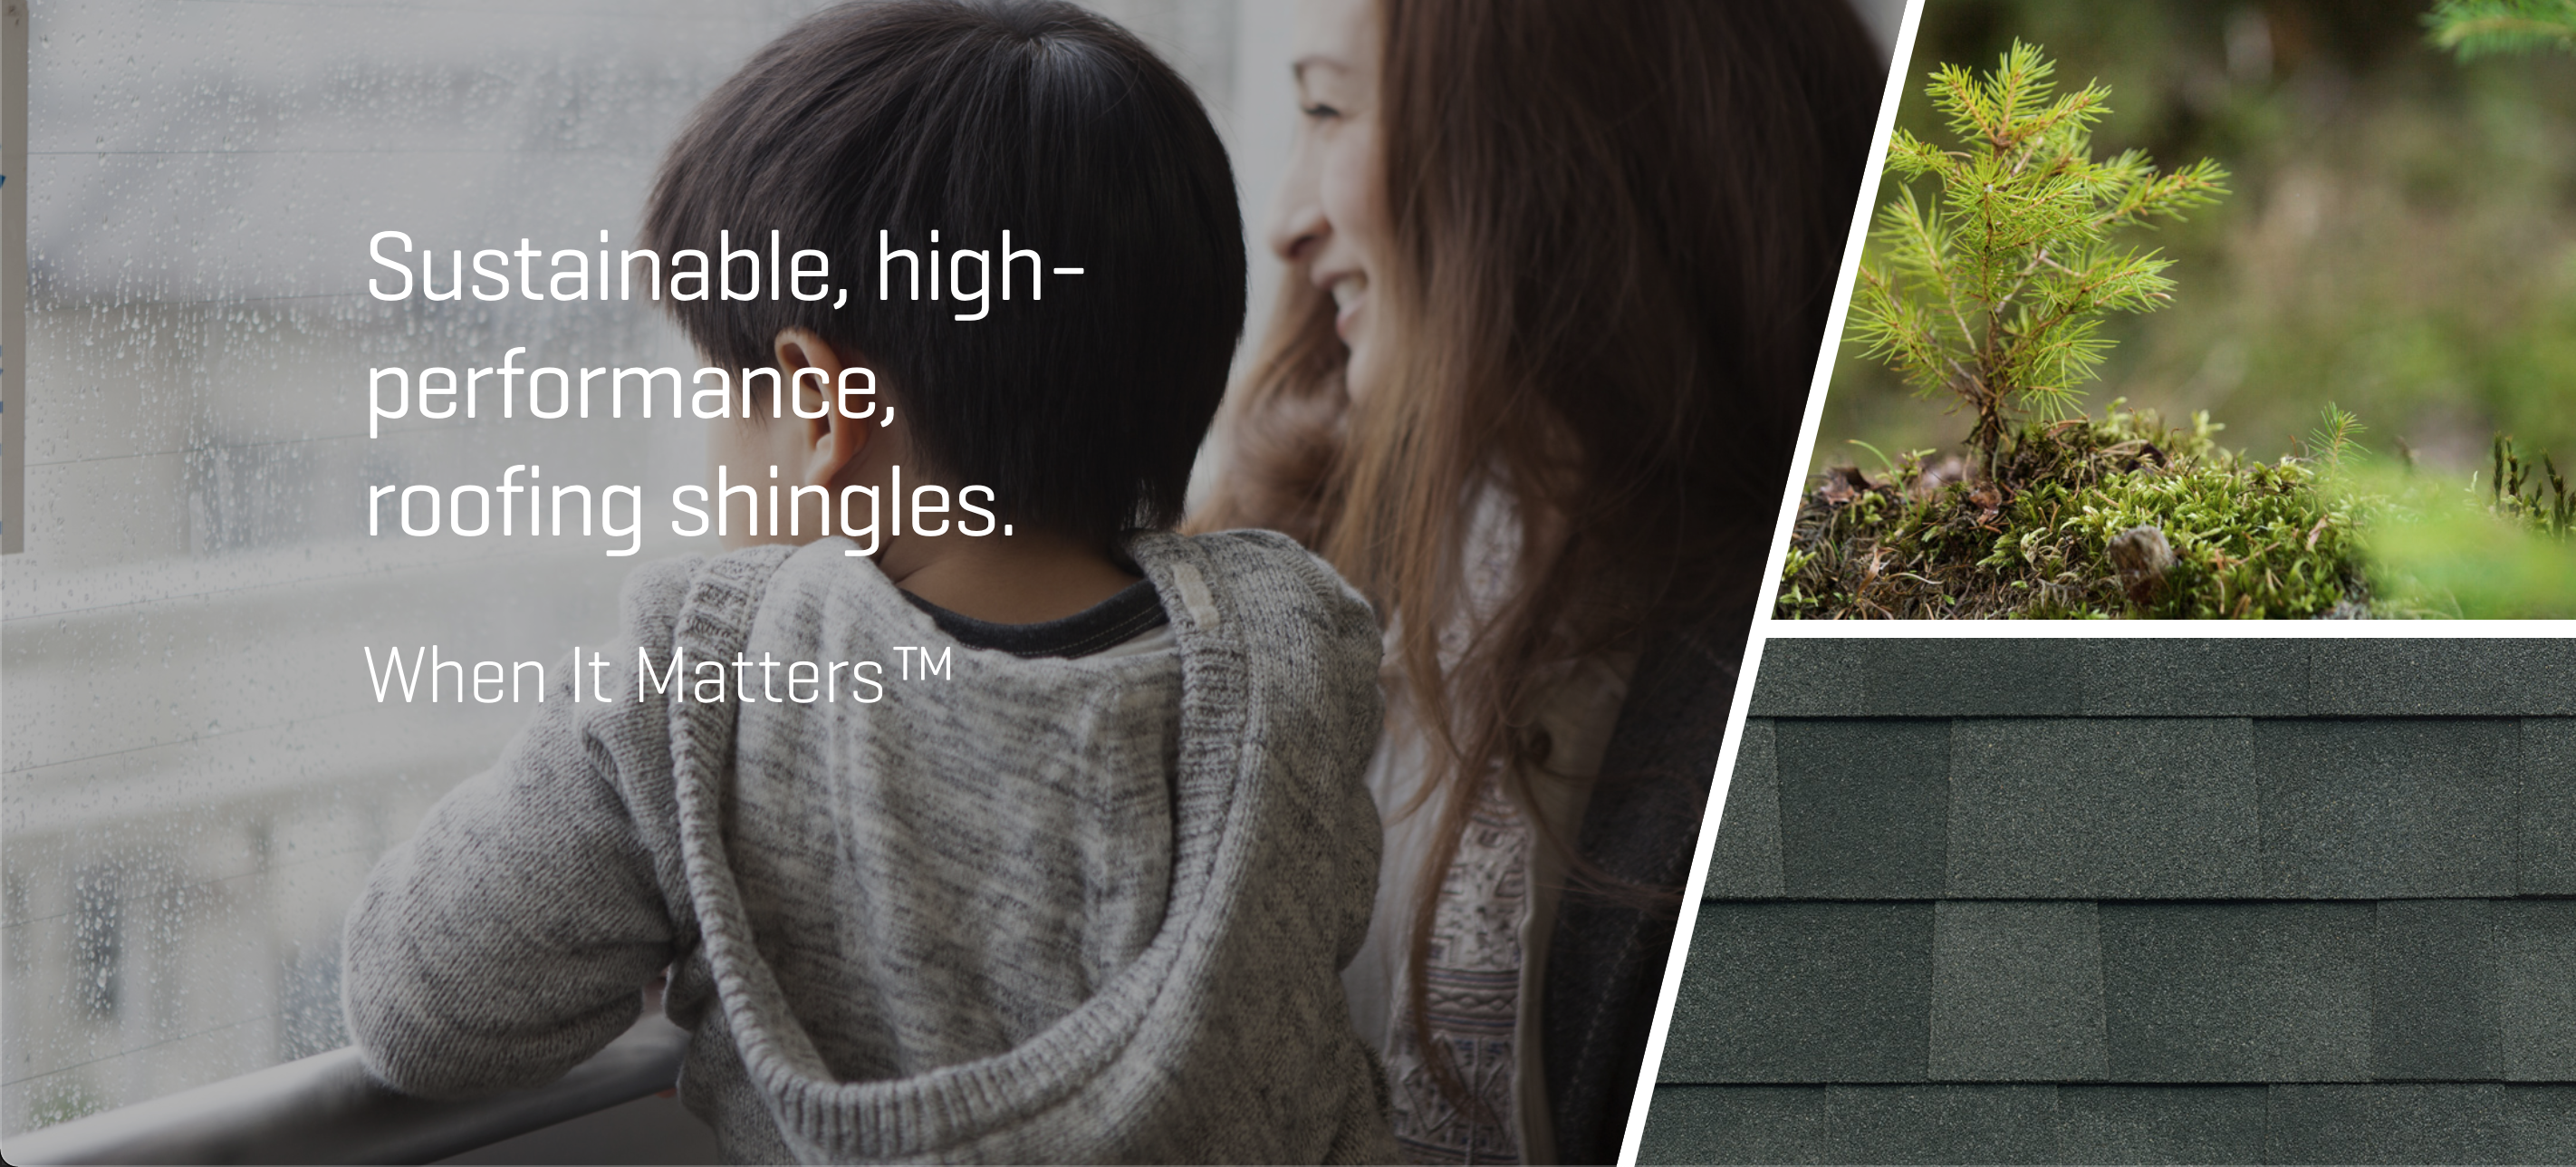 Sustainable, high-performance, roofing shingles.